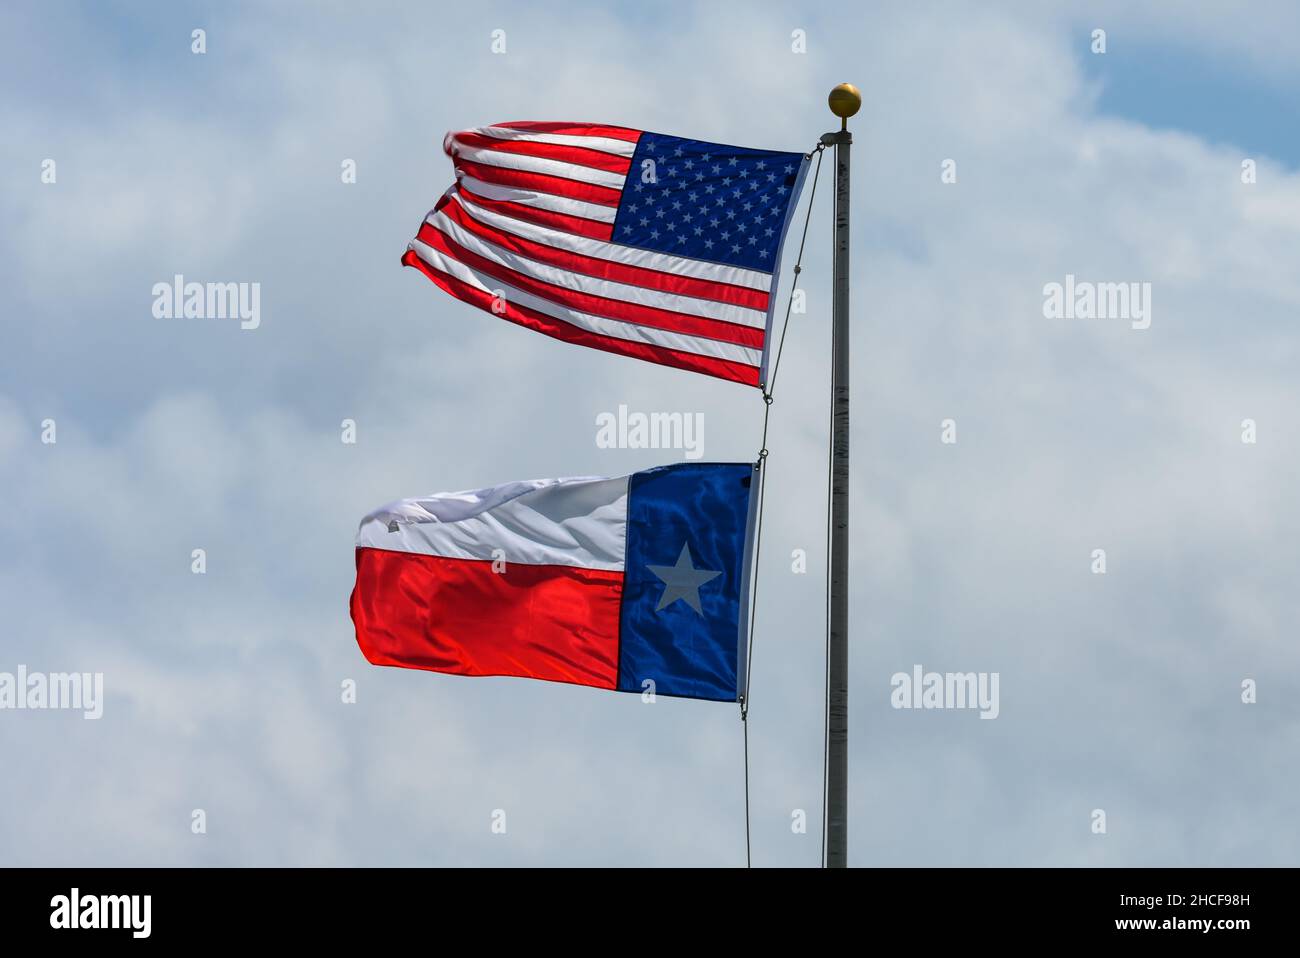 Flags of the United States and Texas waving in the wind. Houston, Texas, USA. Stock Photo